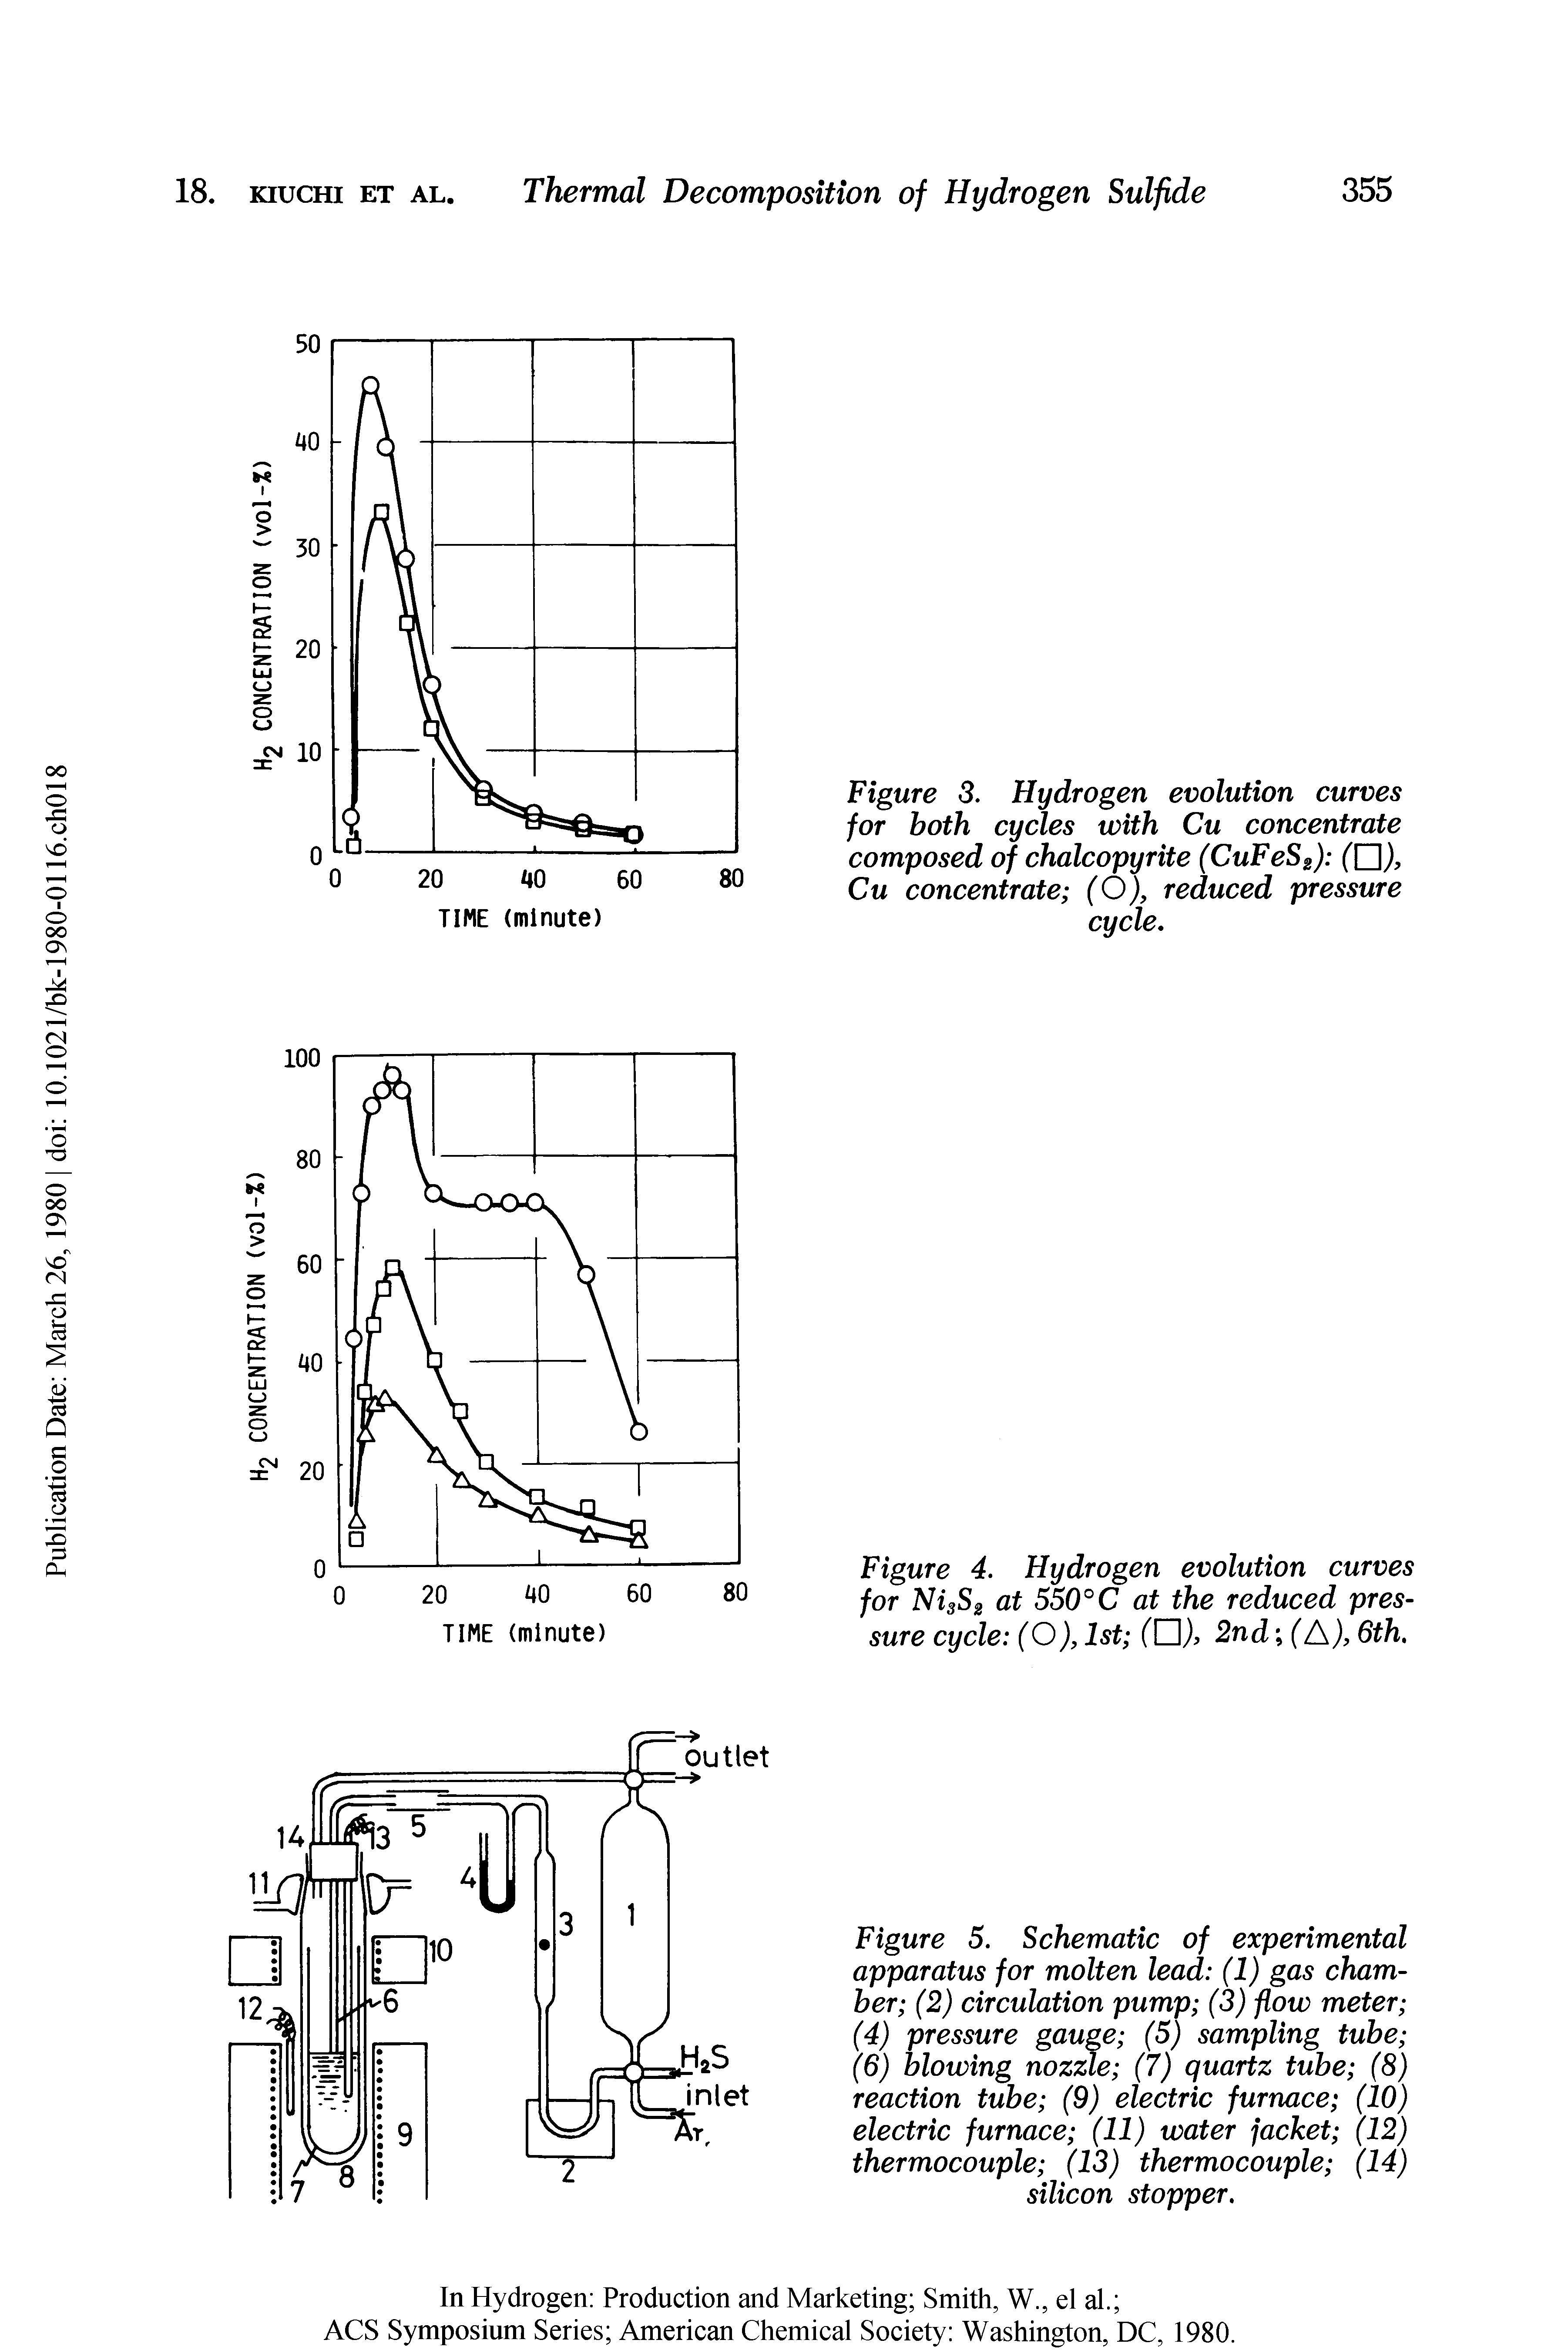 Figure 4. Hydrogen evolution curves for Ni3S2 at 550°C at the reduced pressure cycle (O), 1st (H ), 2nd (A), 6th.